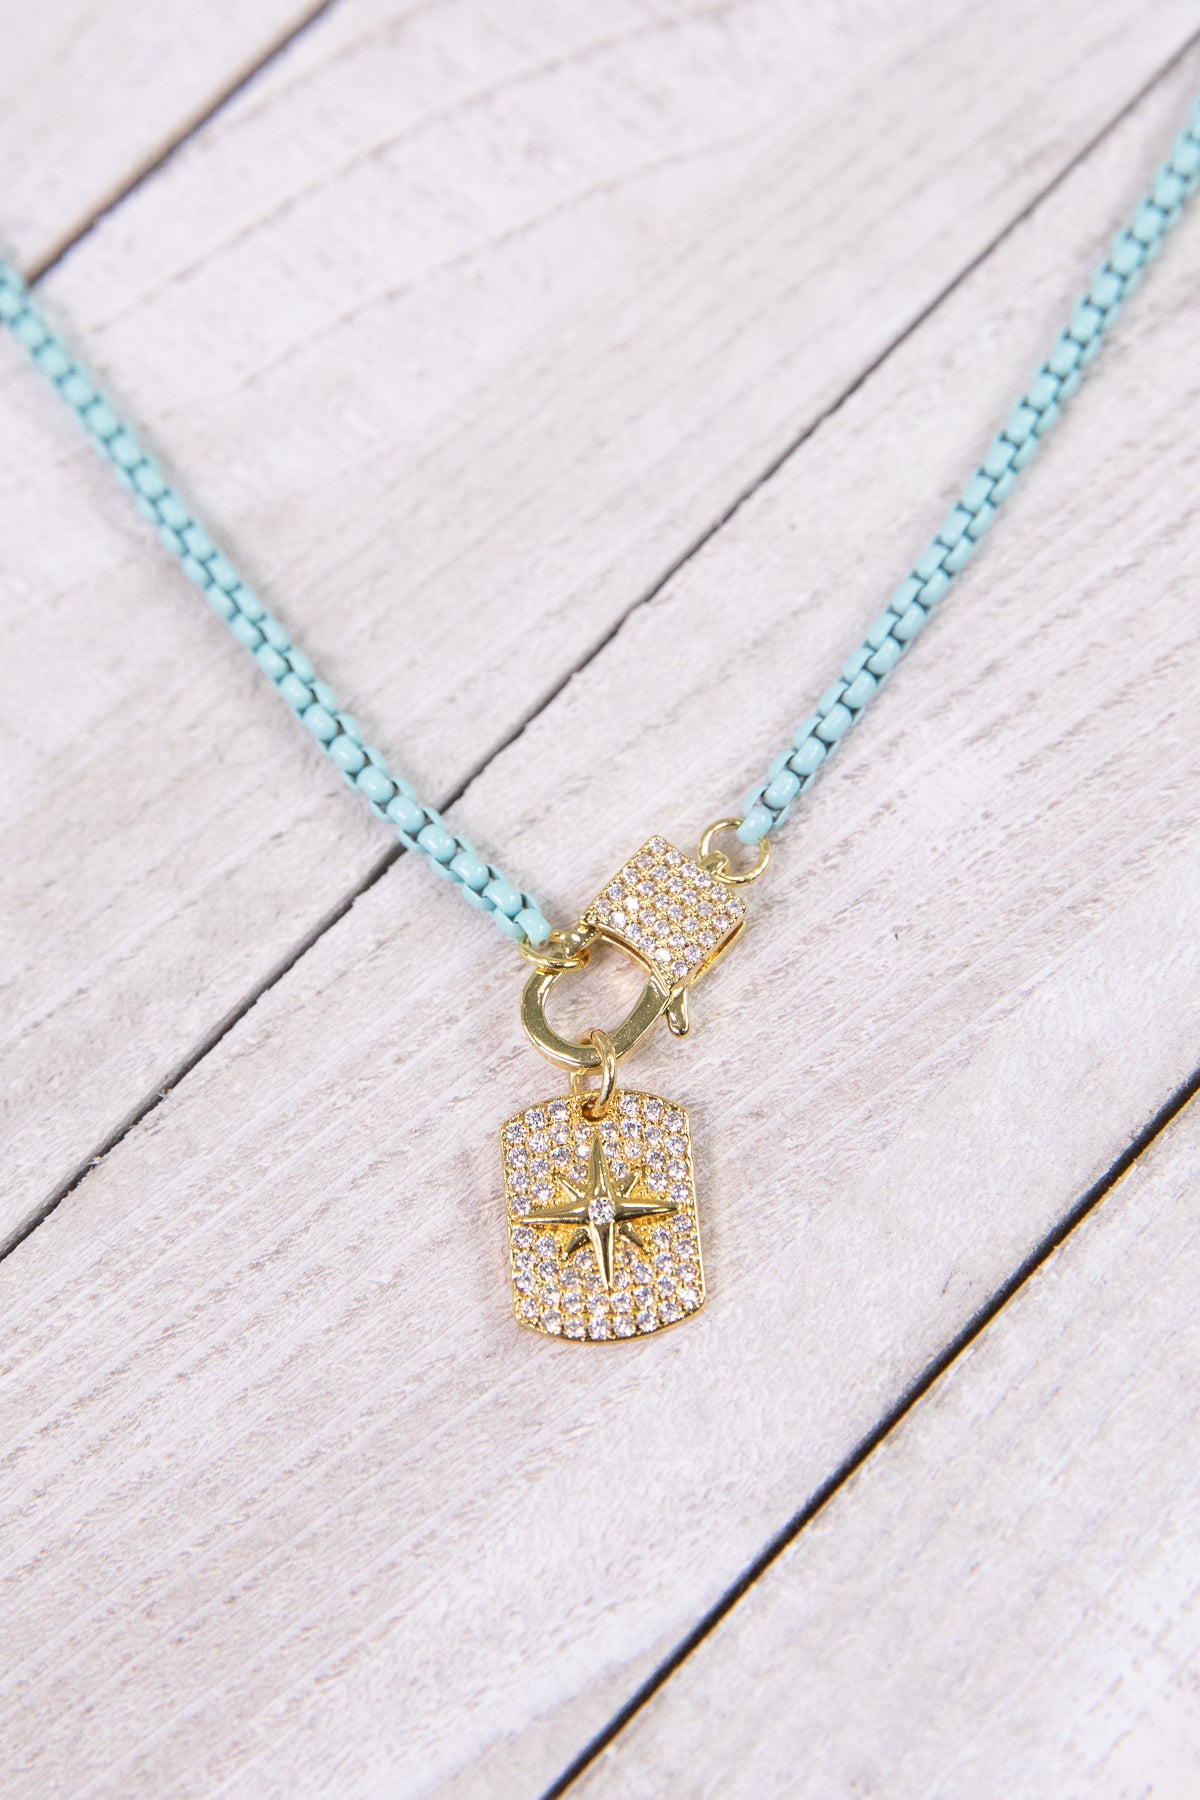 Sky Blue Locket Pendant Chainlink Necklace - Filly Flair